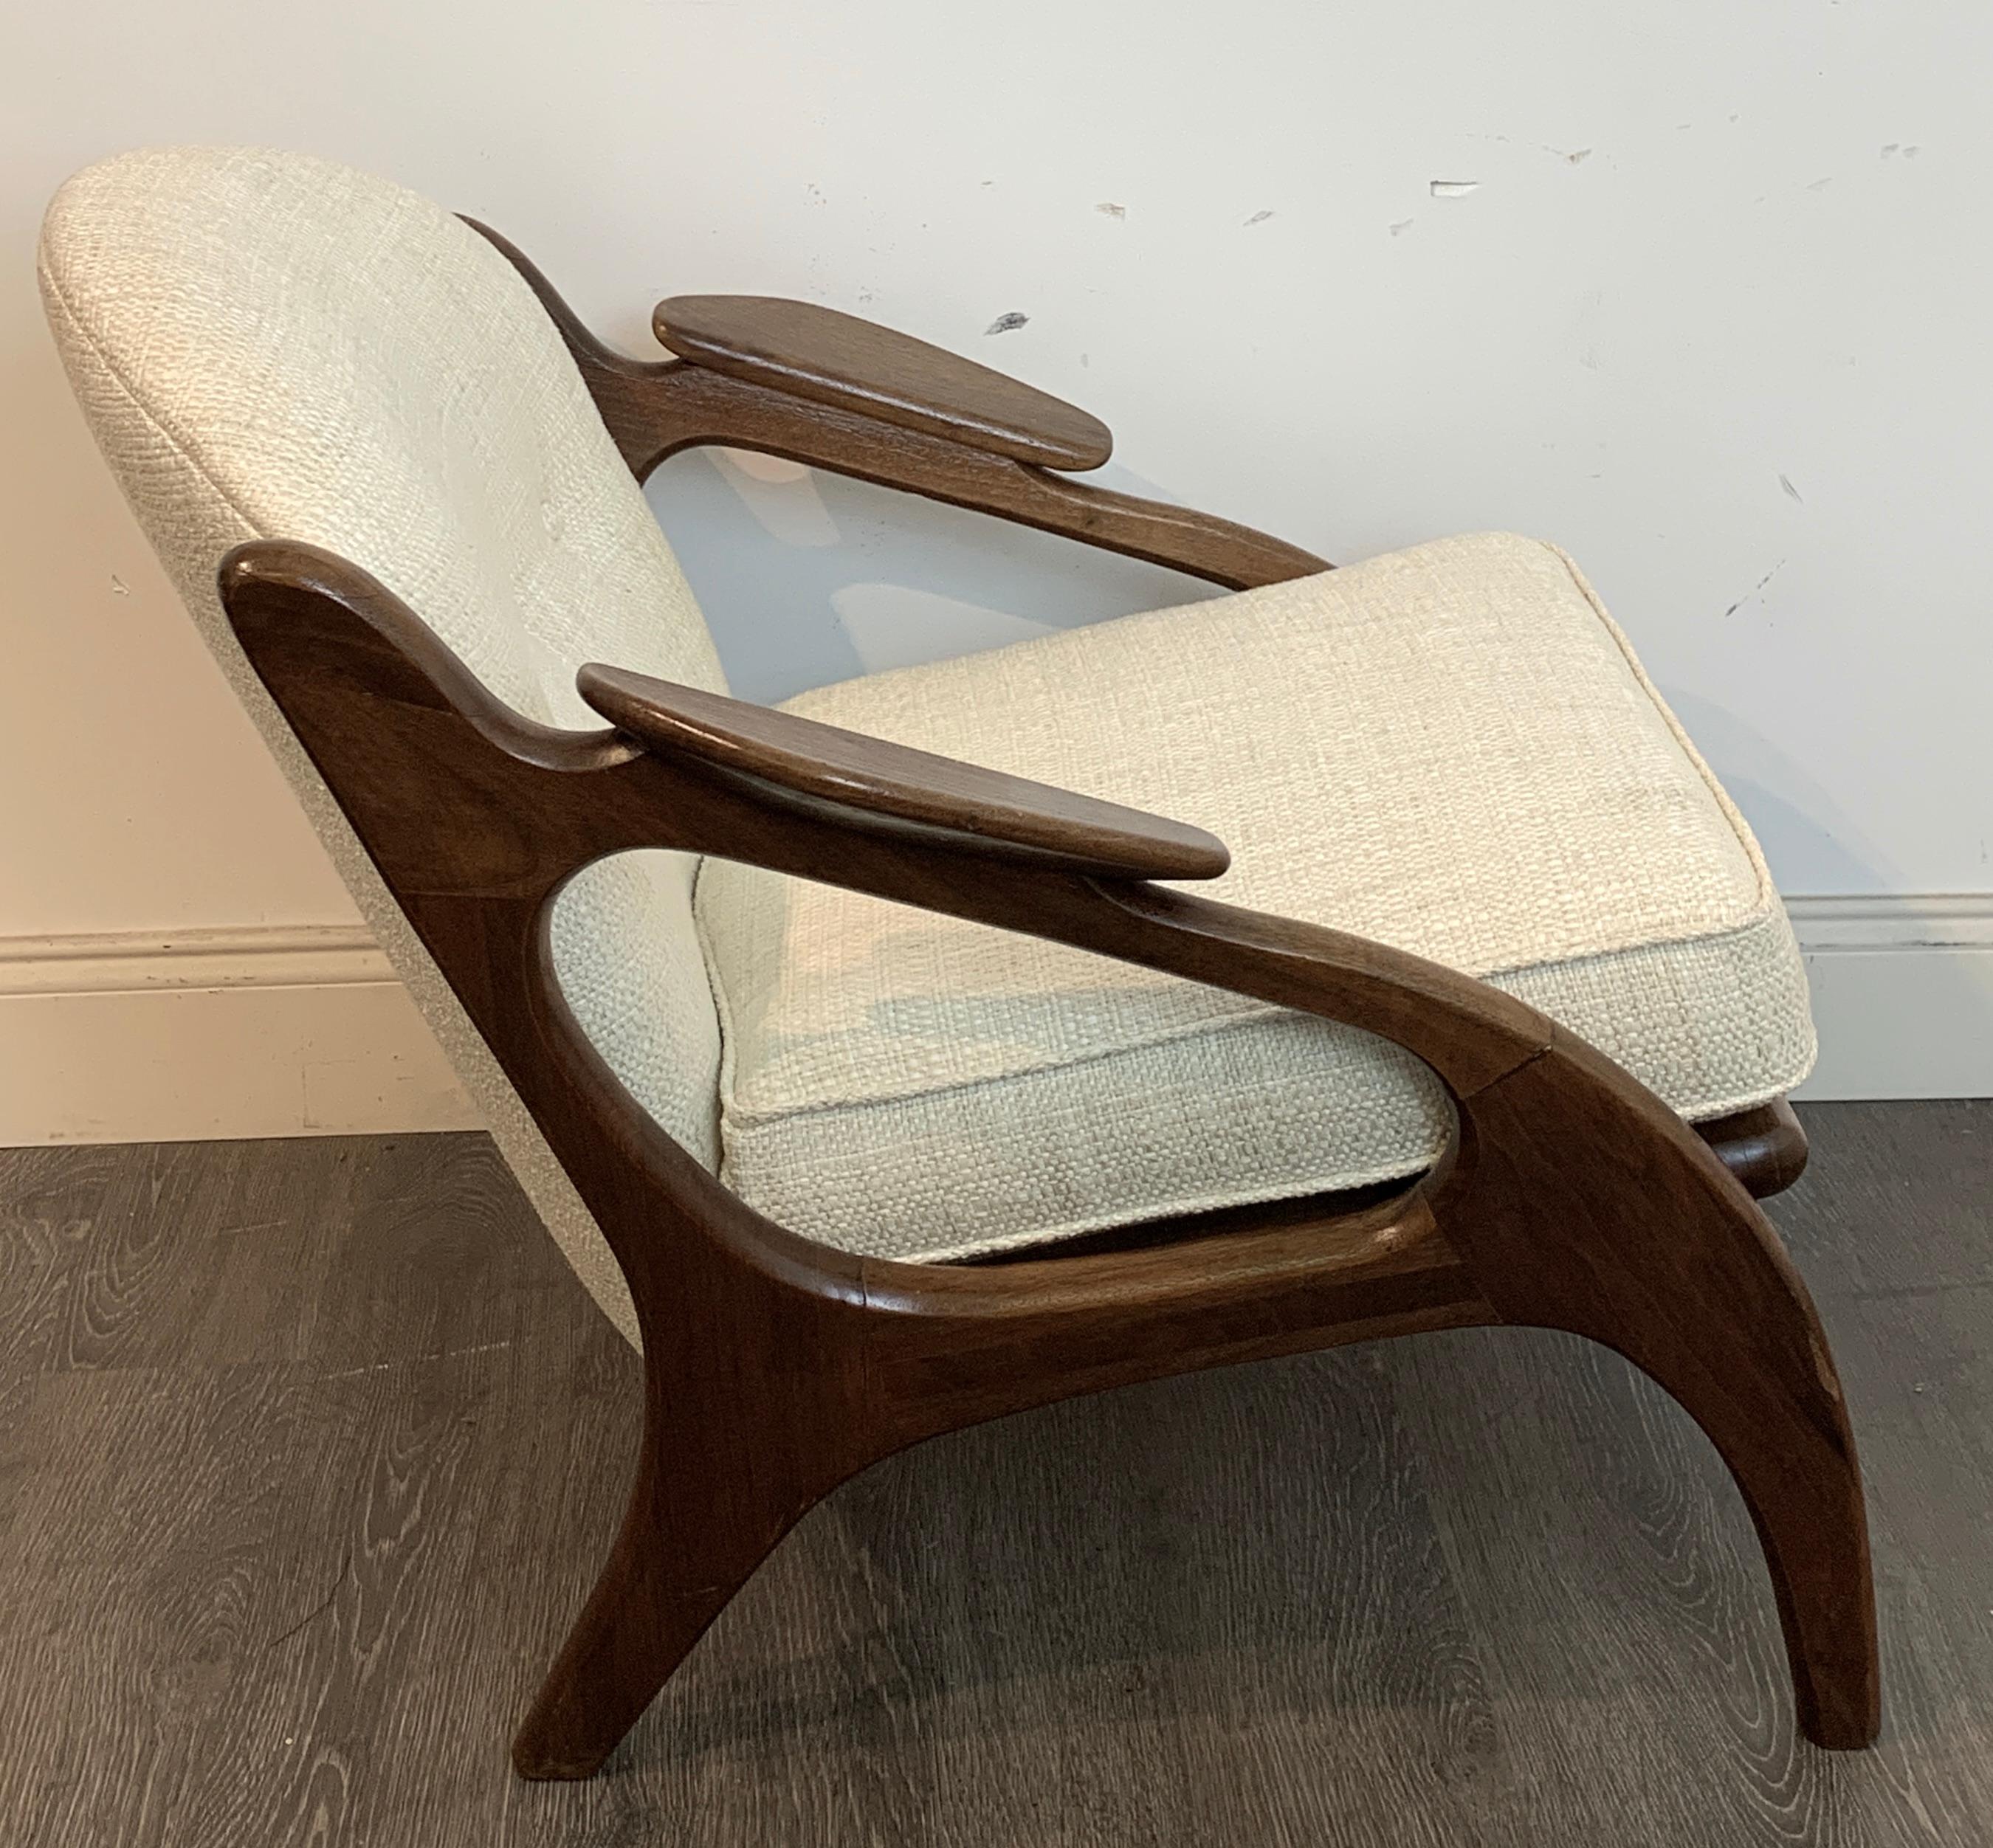 Mid-Century Modern Adrian Pearsall for Craft Associates Lounge Chair #2249-C, Restored